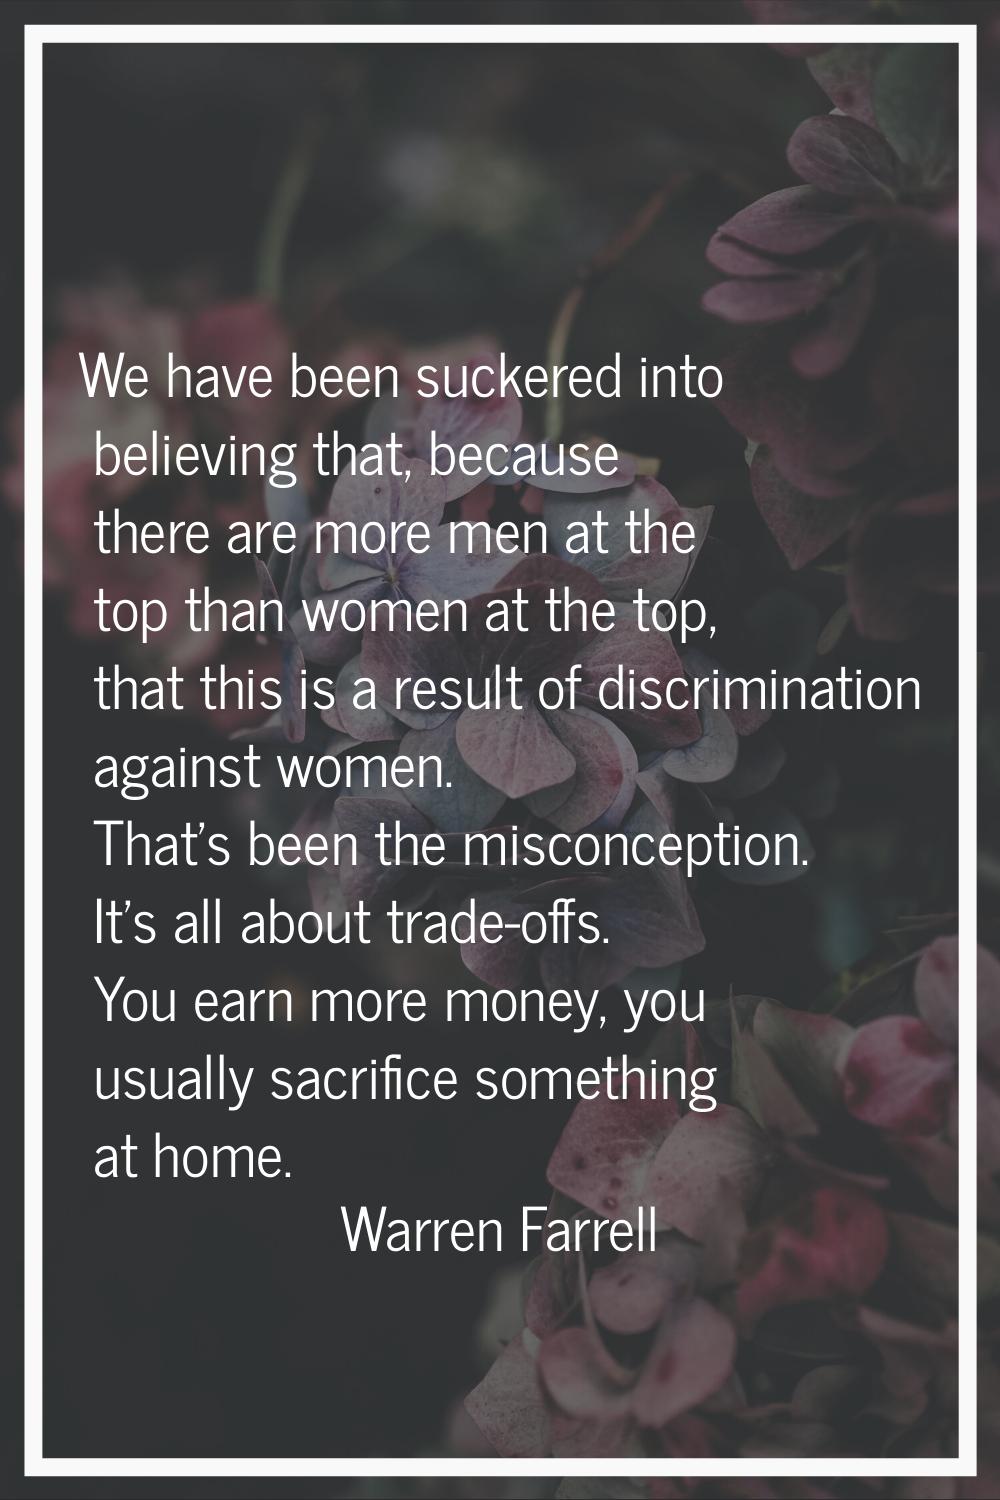 We have been suckered into believing that, because there are more men at the top than women at the 